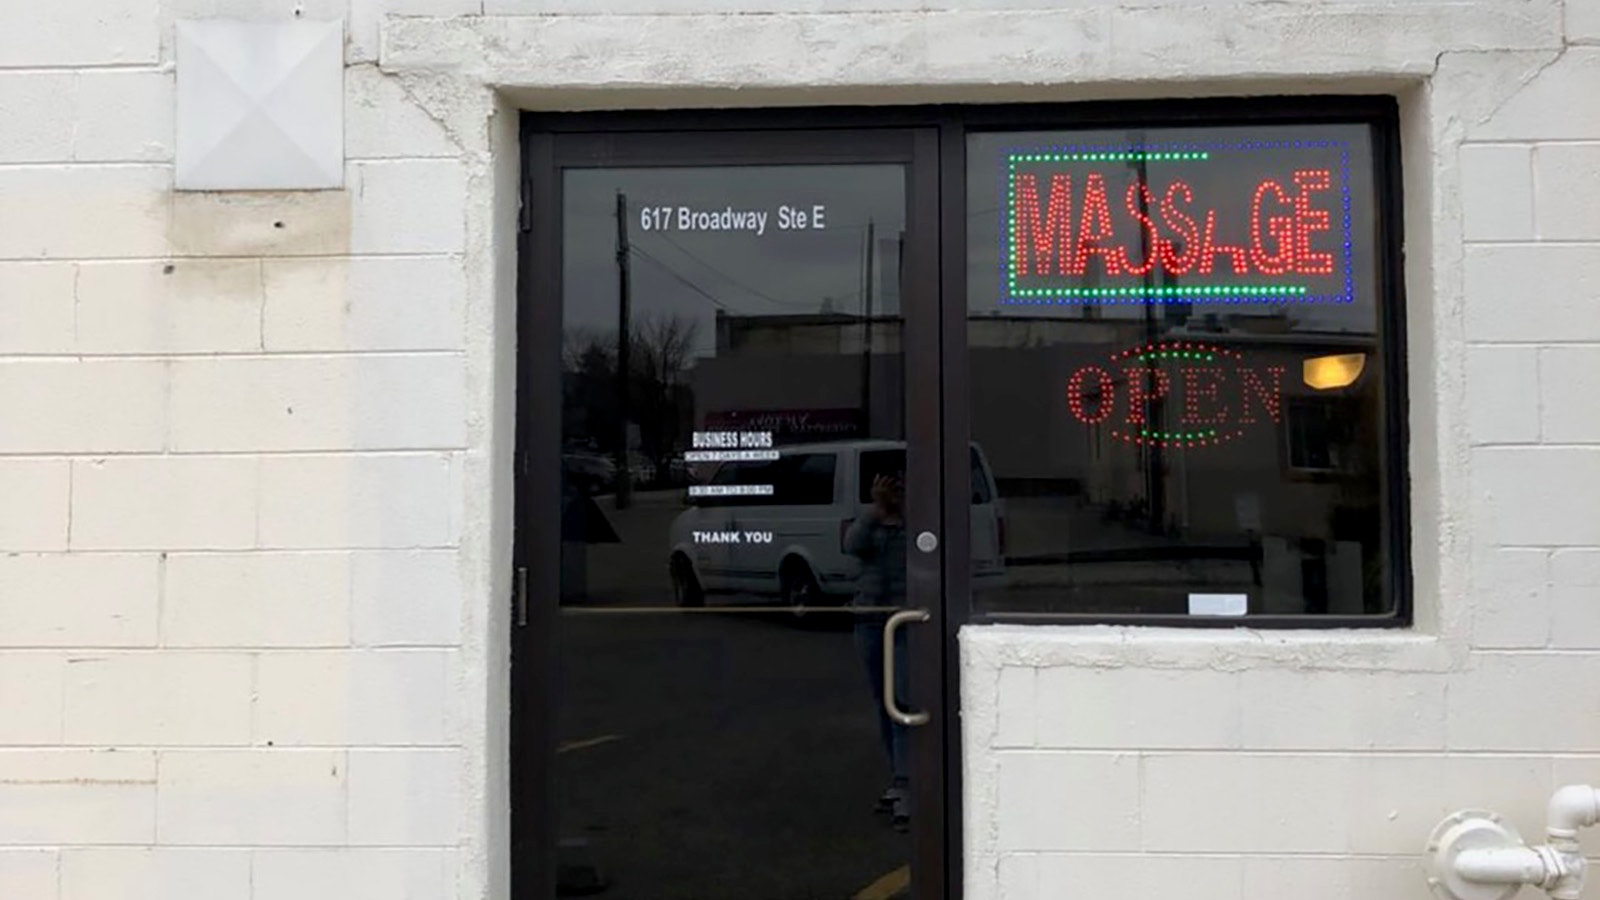 Asian Massage at 617 Broadway St. in Rock Springs was raided Tuesday after a months-long investigation into suspicions of sex trafficking.